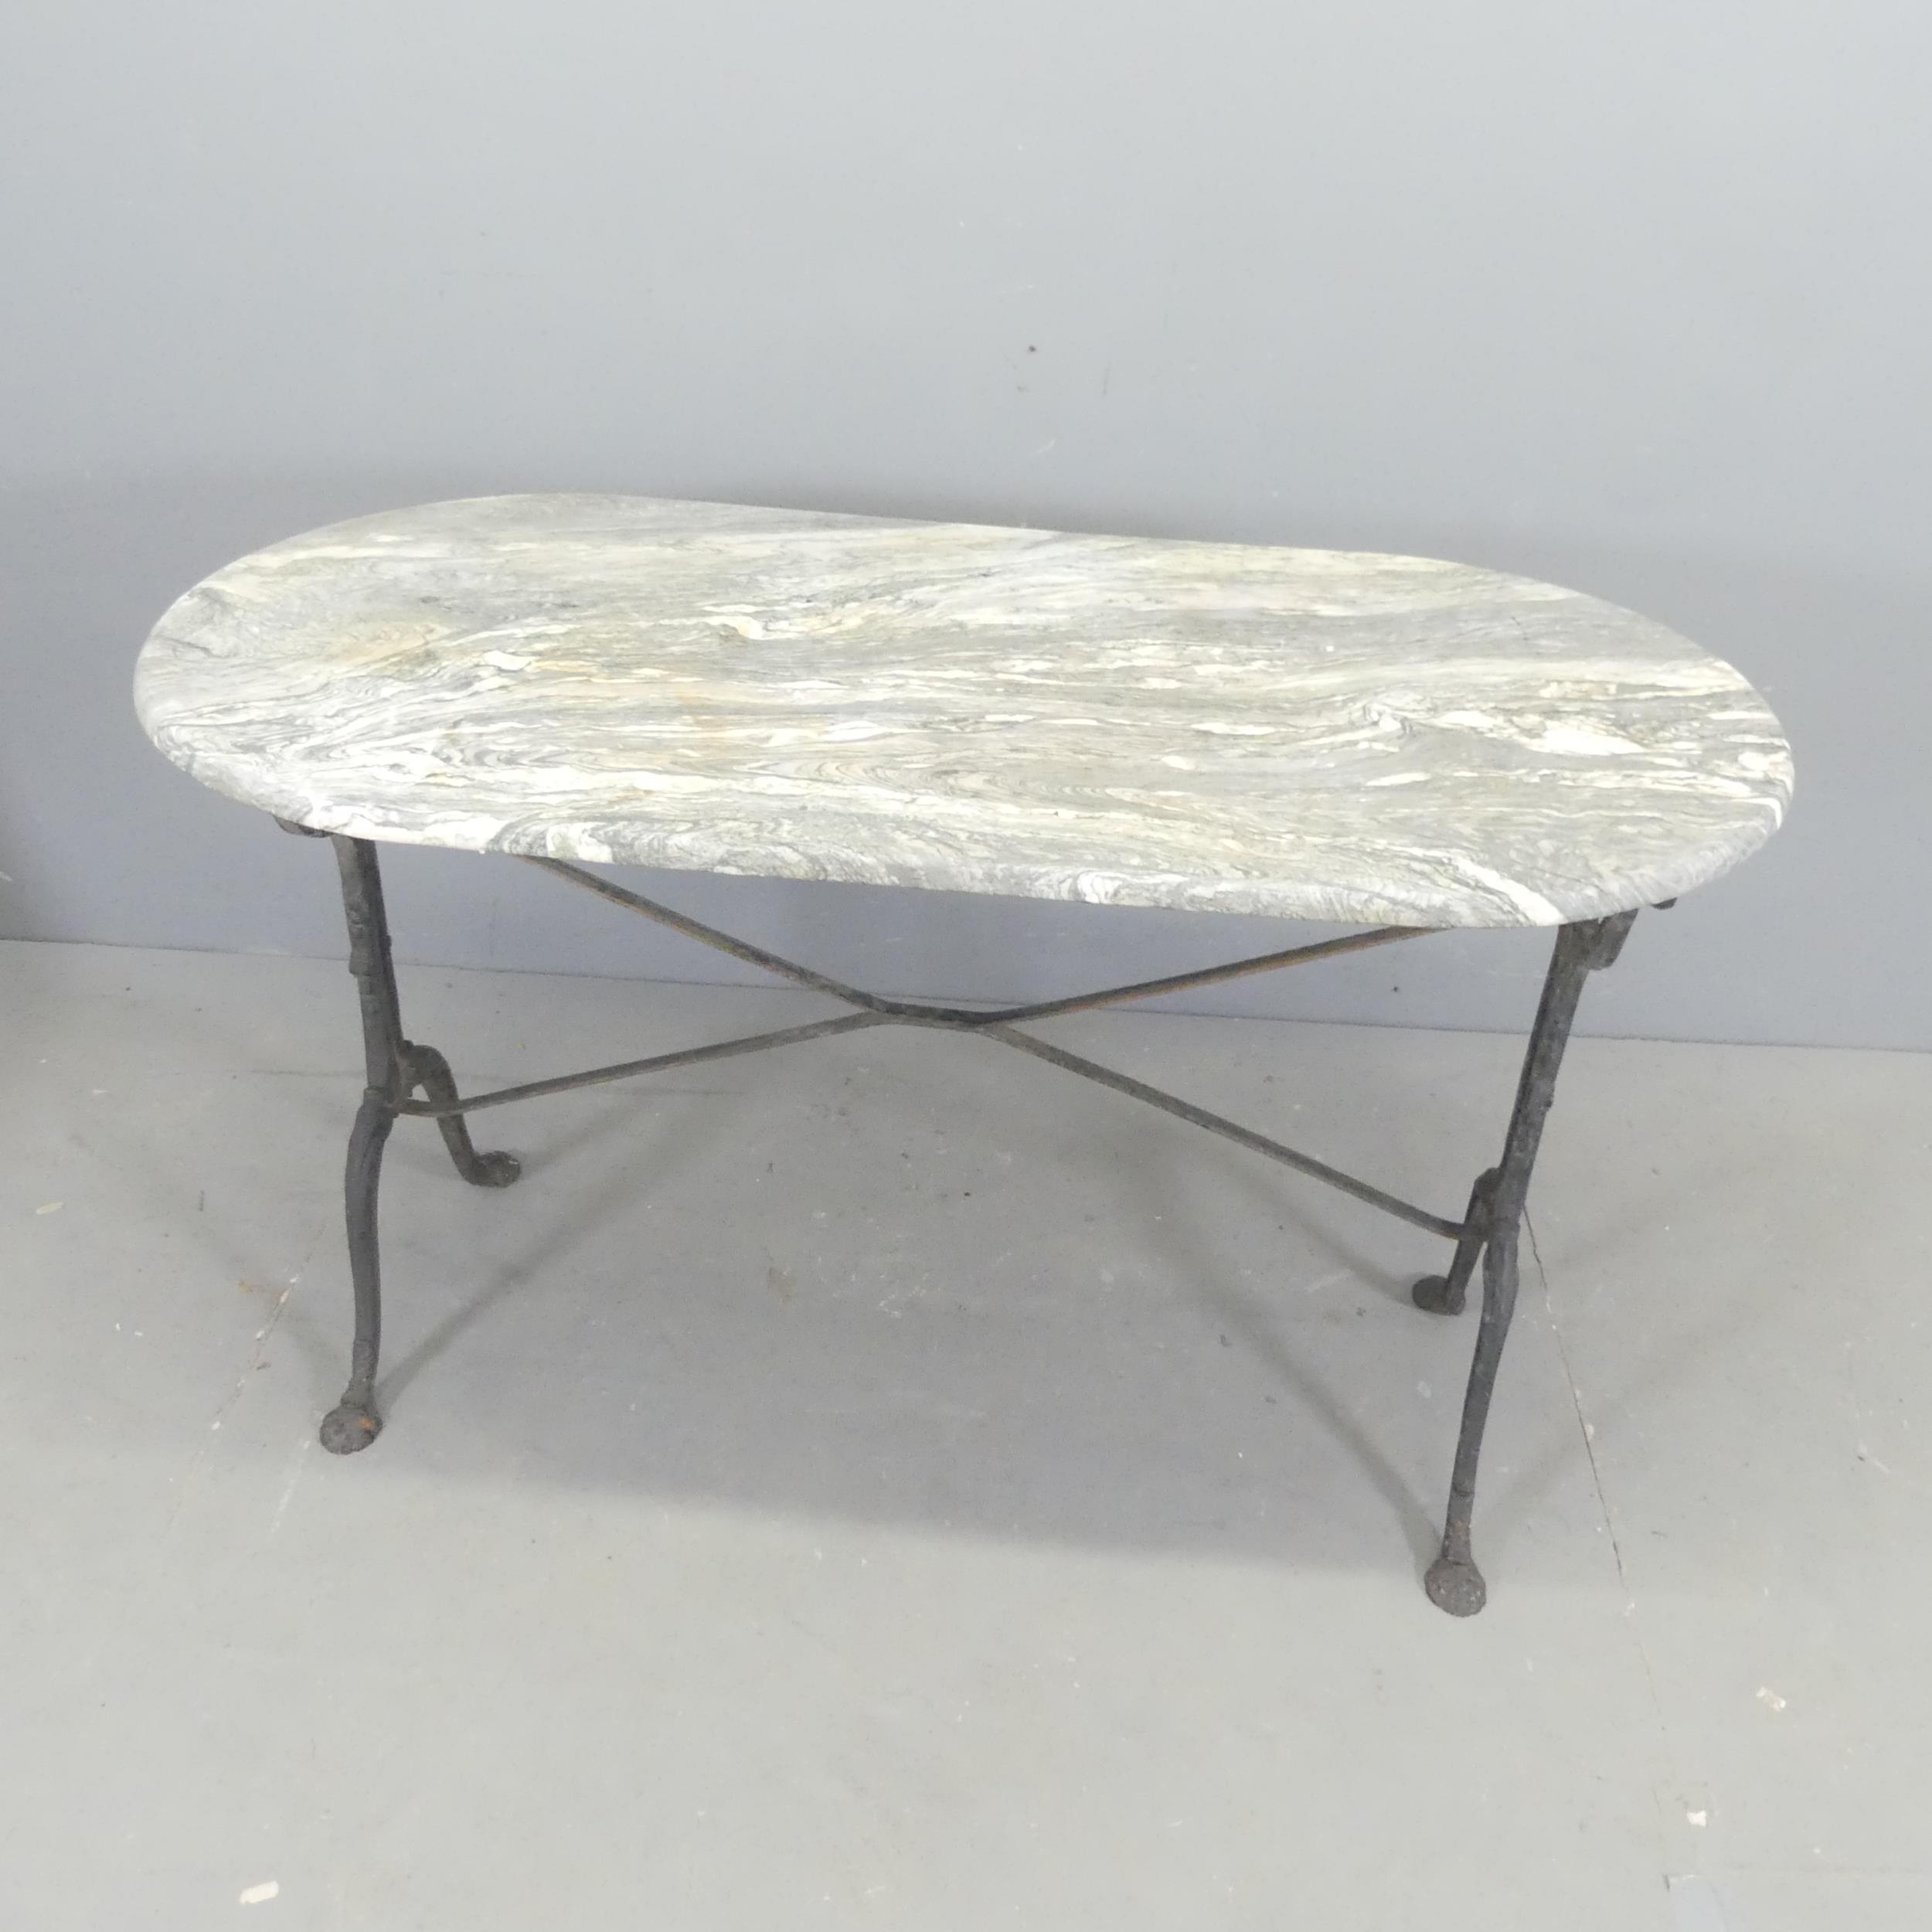 An oval marble-topped garden table on cast-iron frame. 129x72x60cm.